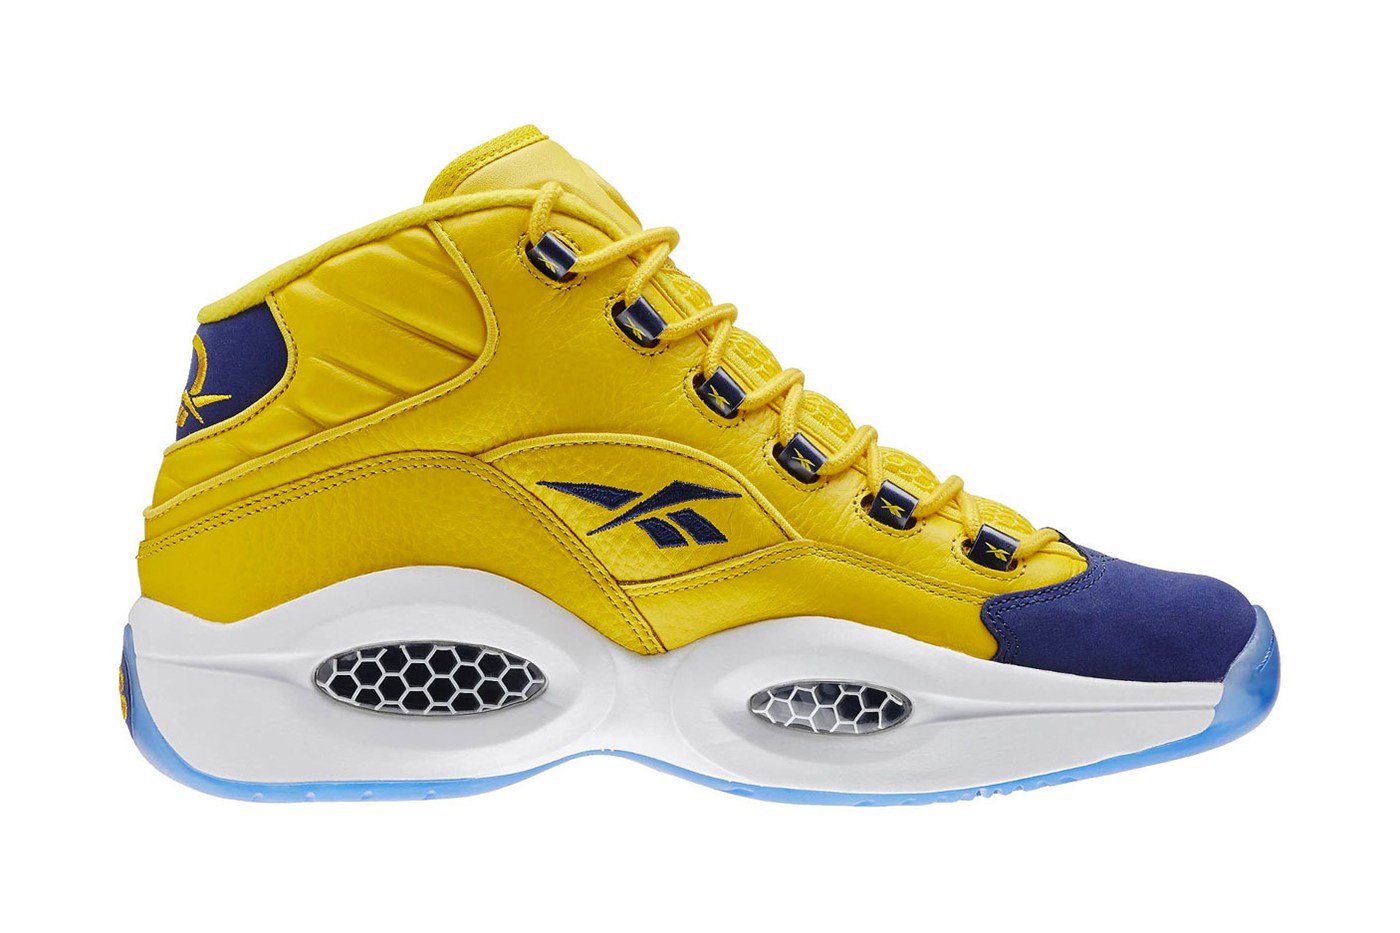 reebok questions for sale